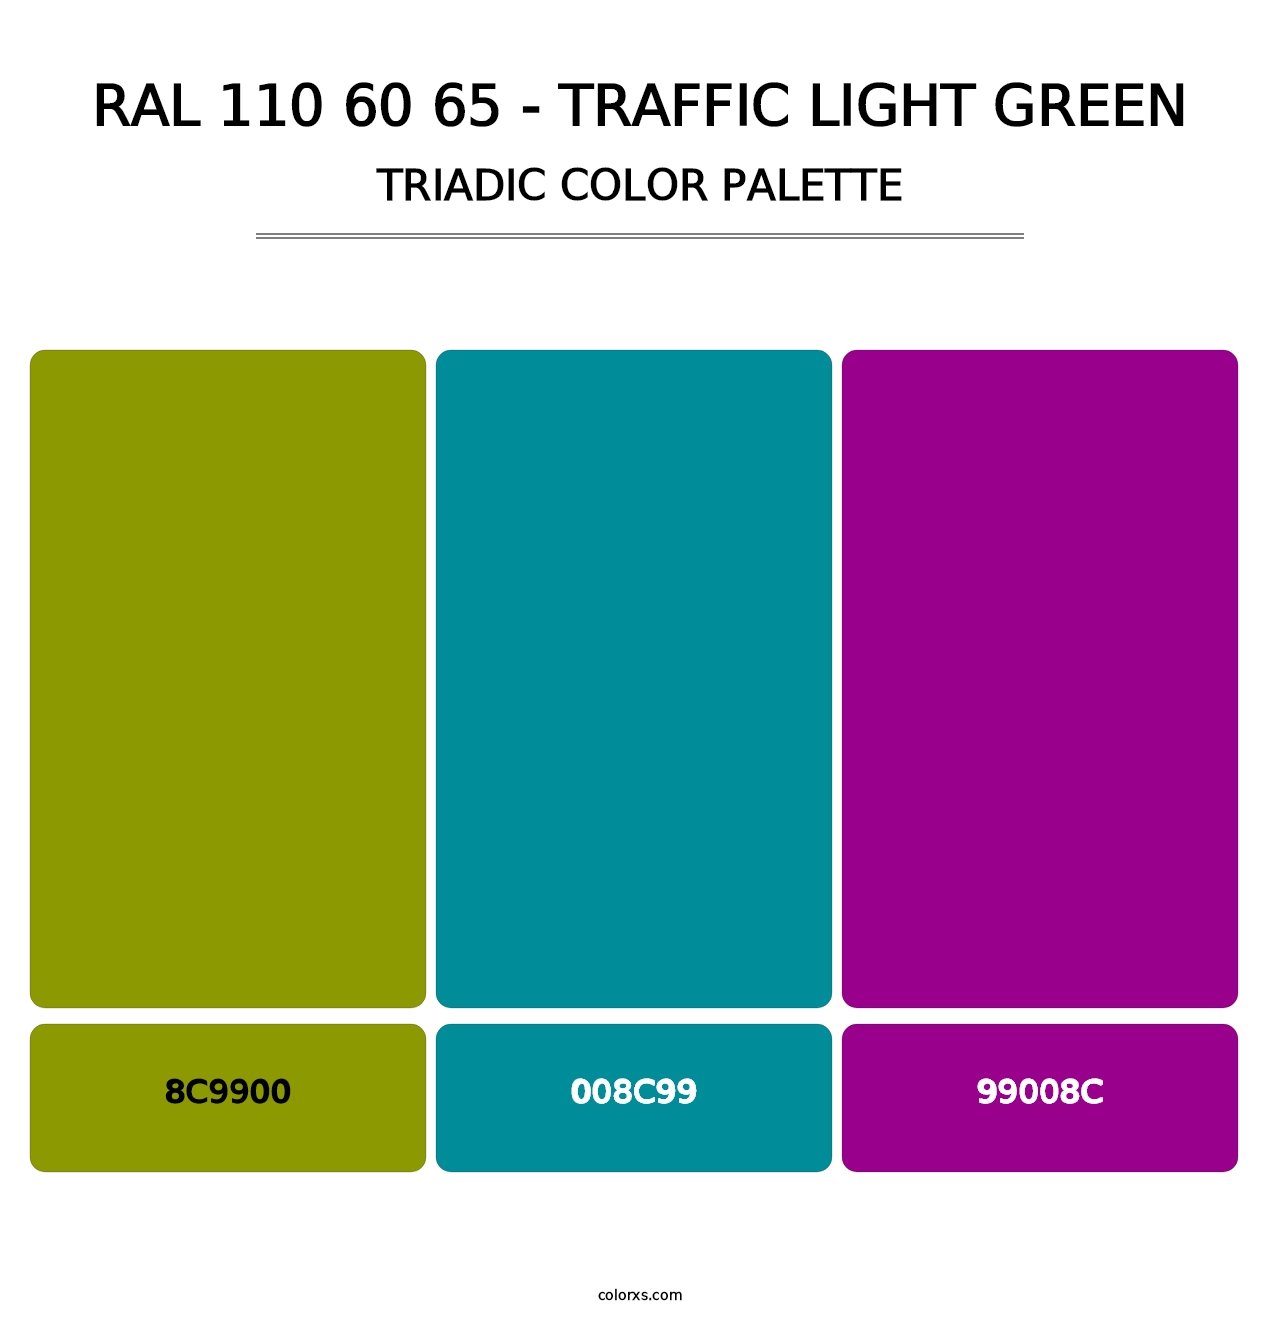 RAL 110 60 65 - Traffic Light Green - Triadic Color Palette